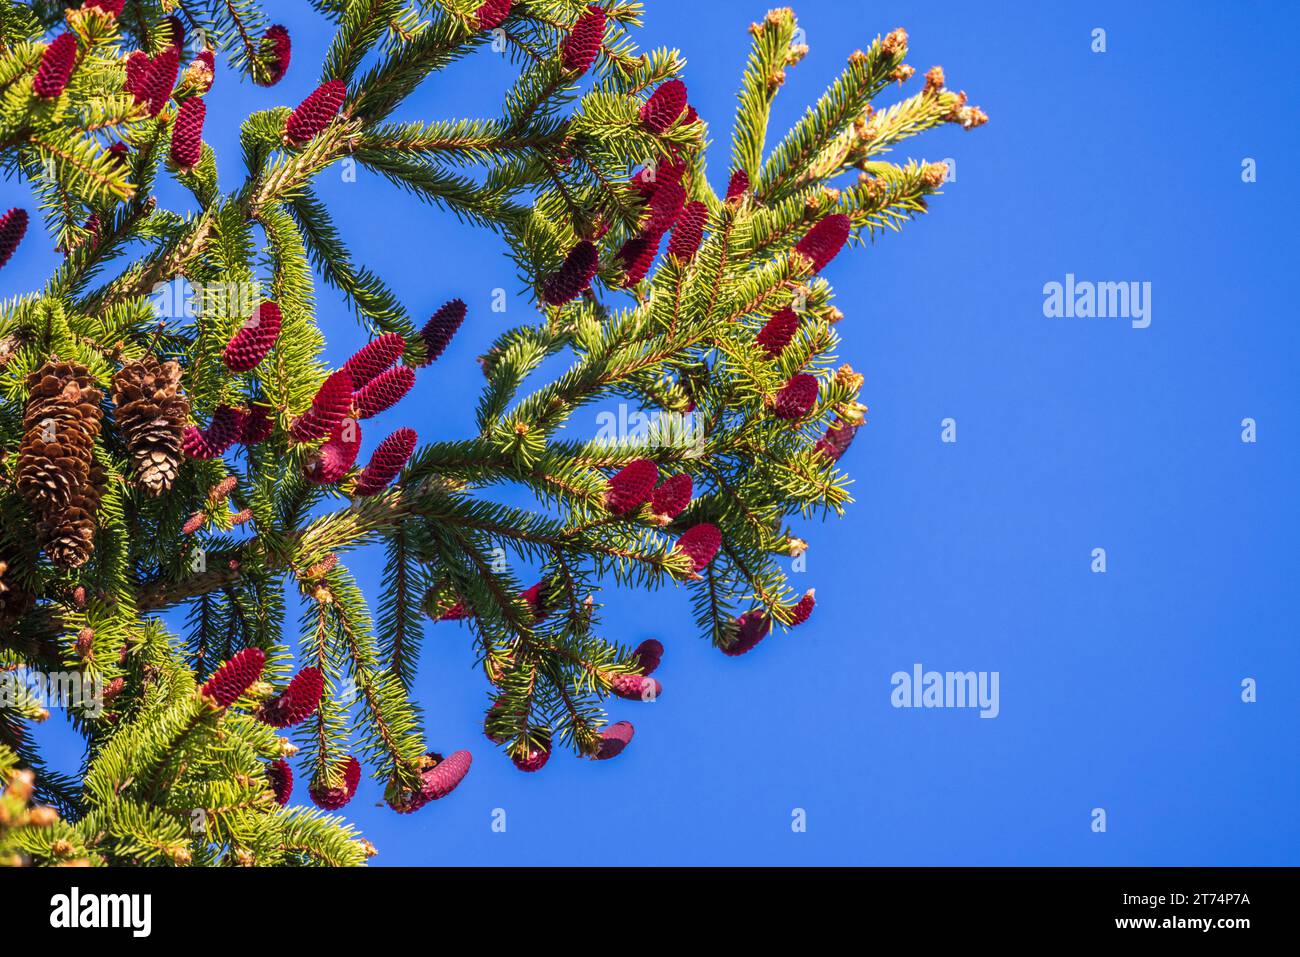 Spruce tree branch with red cones is under clear blue sky on a spring day Stock Photo